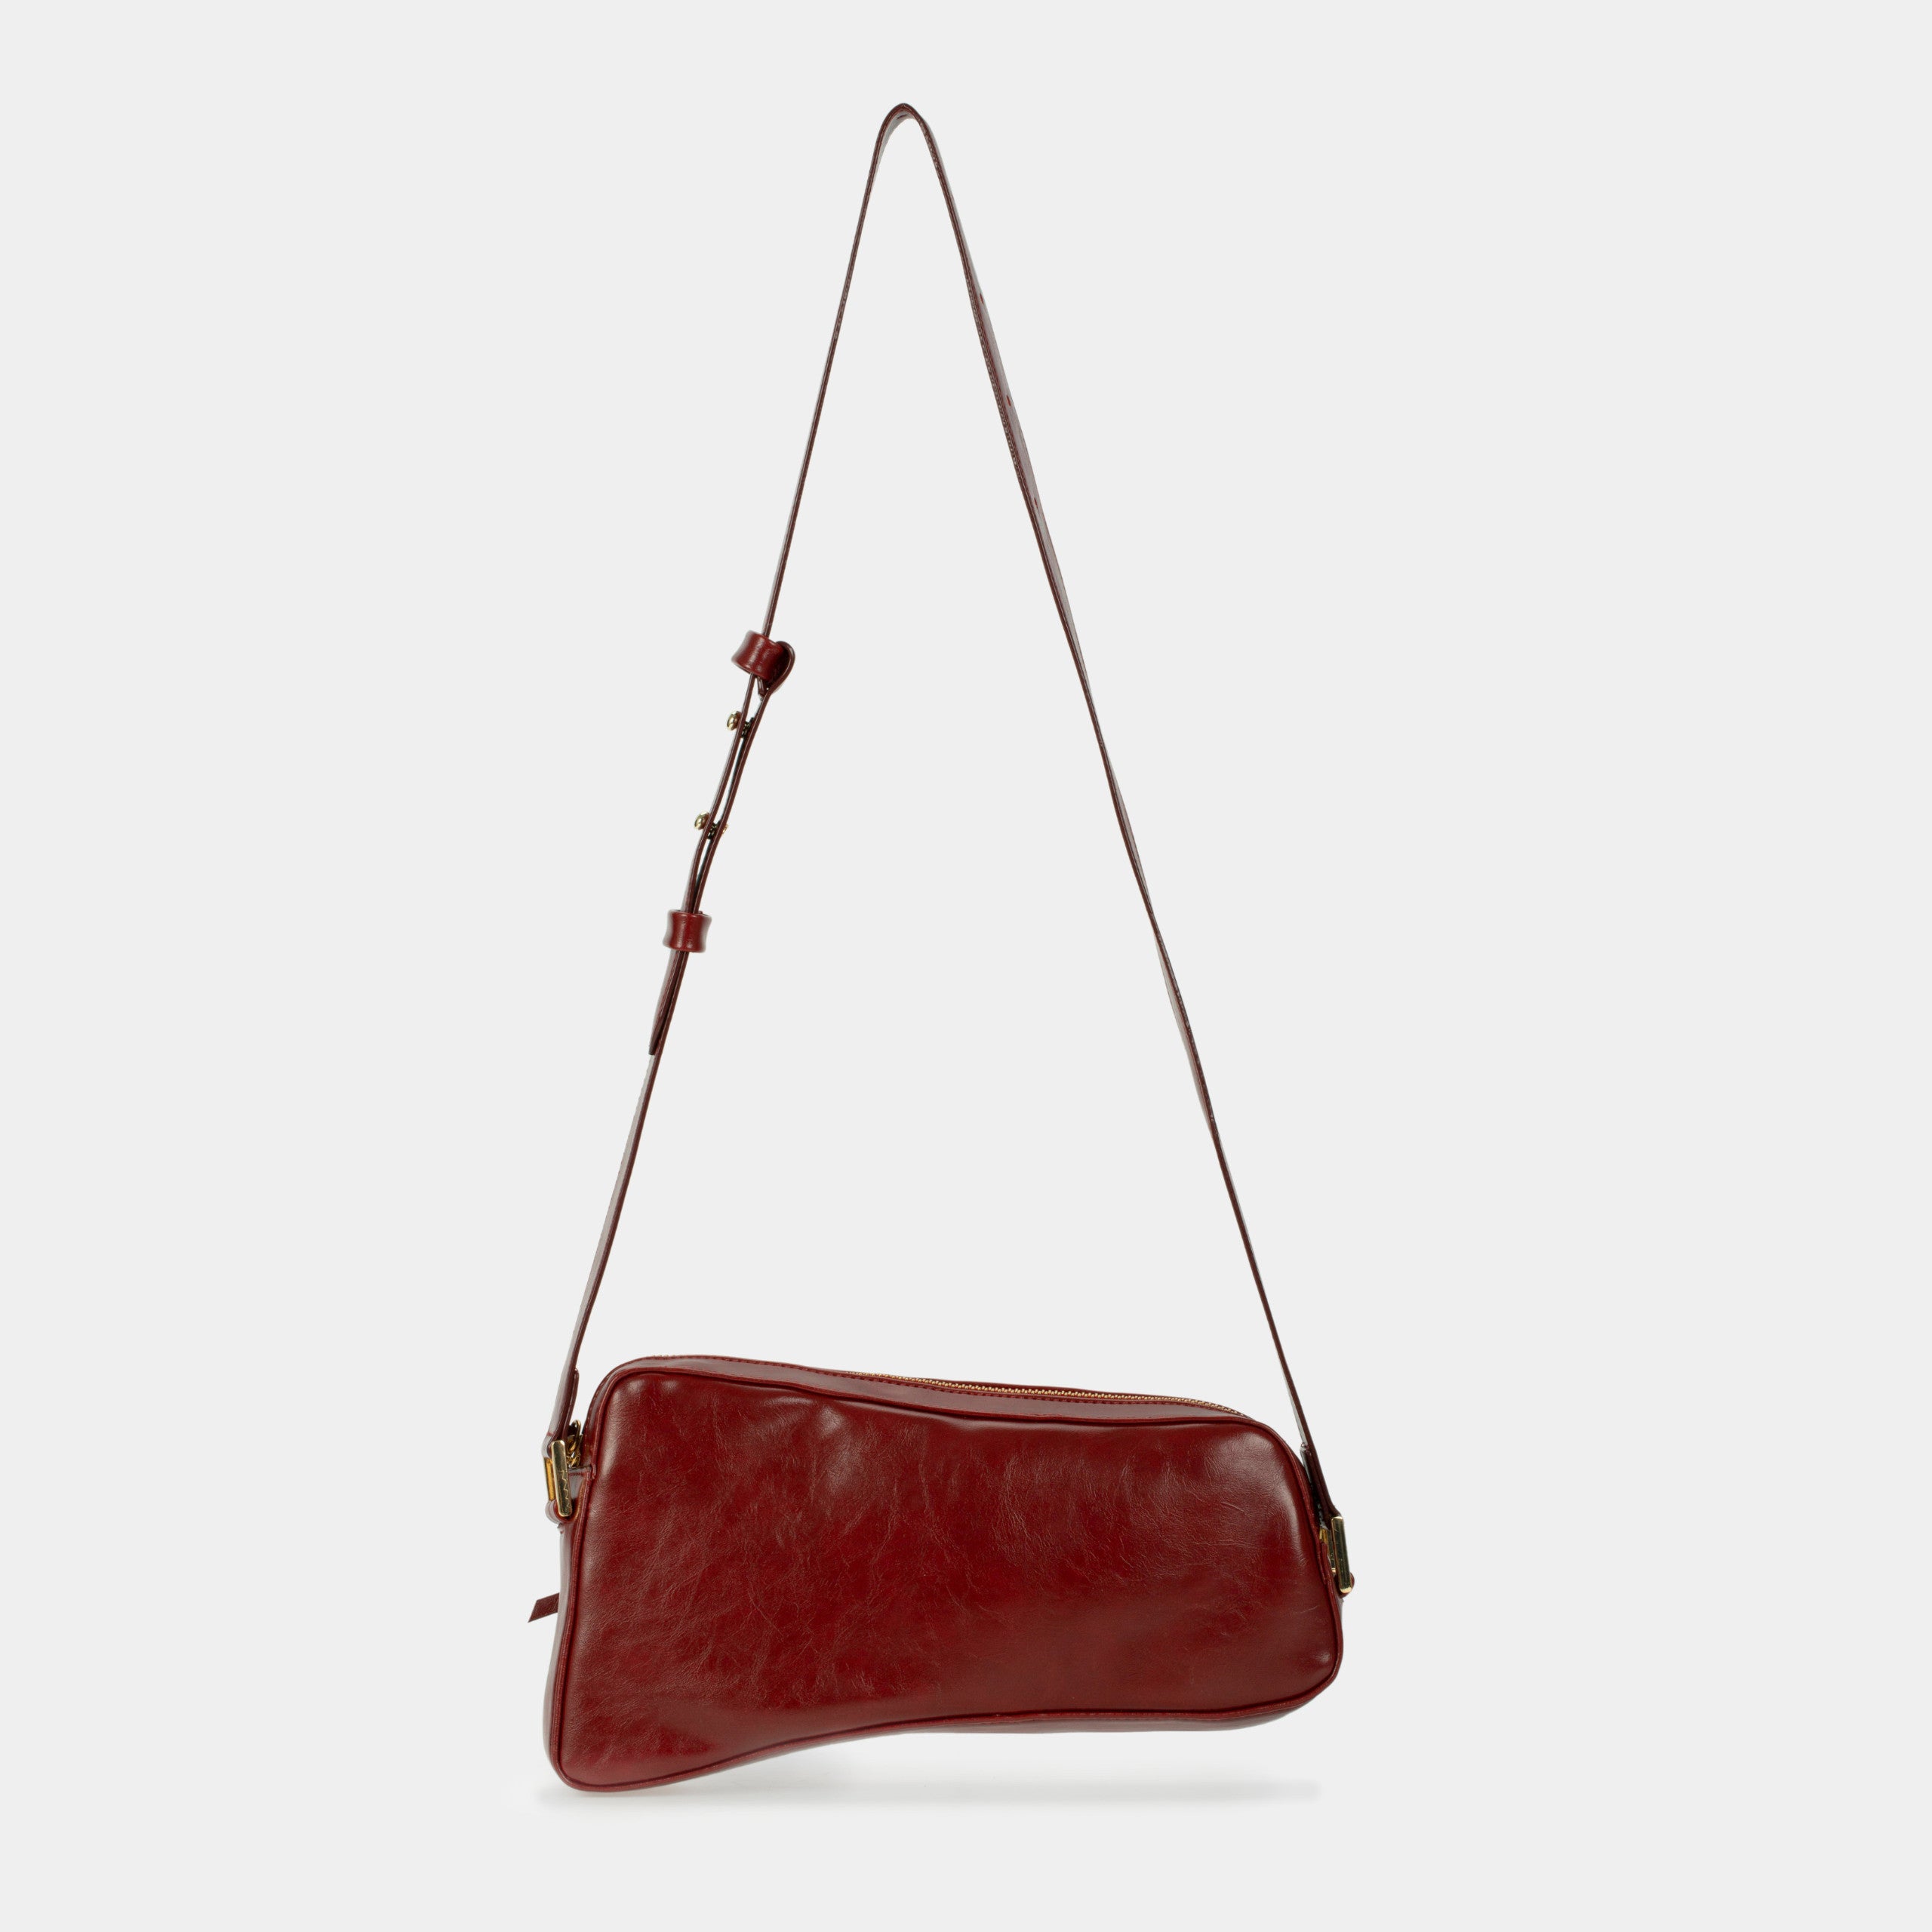 Freely Bag with Bow in Dark Brown